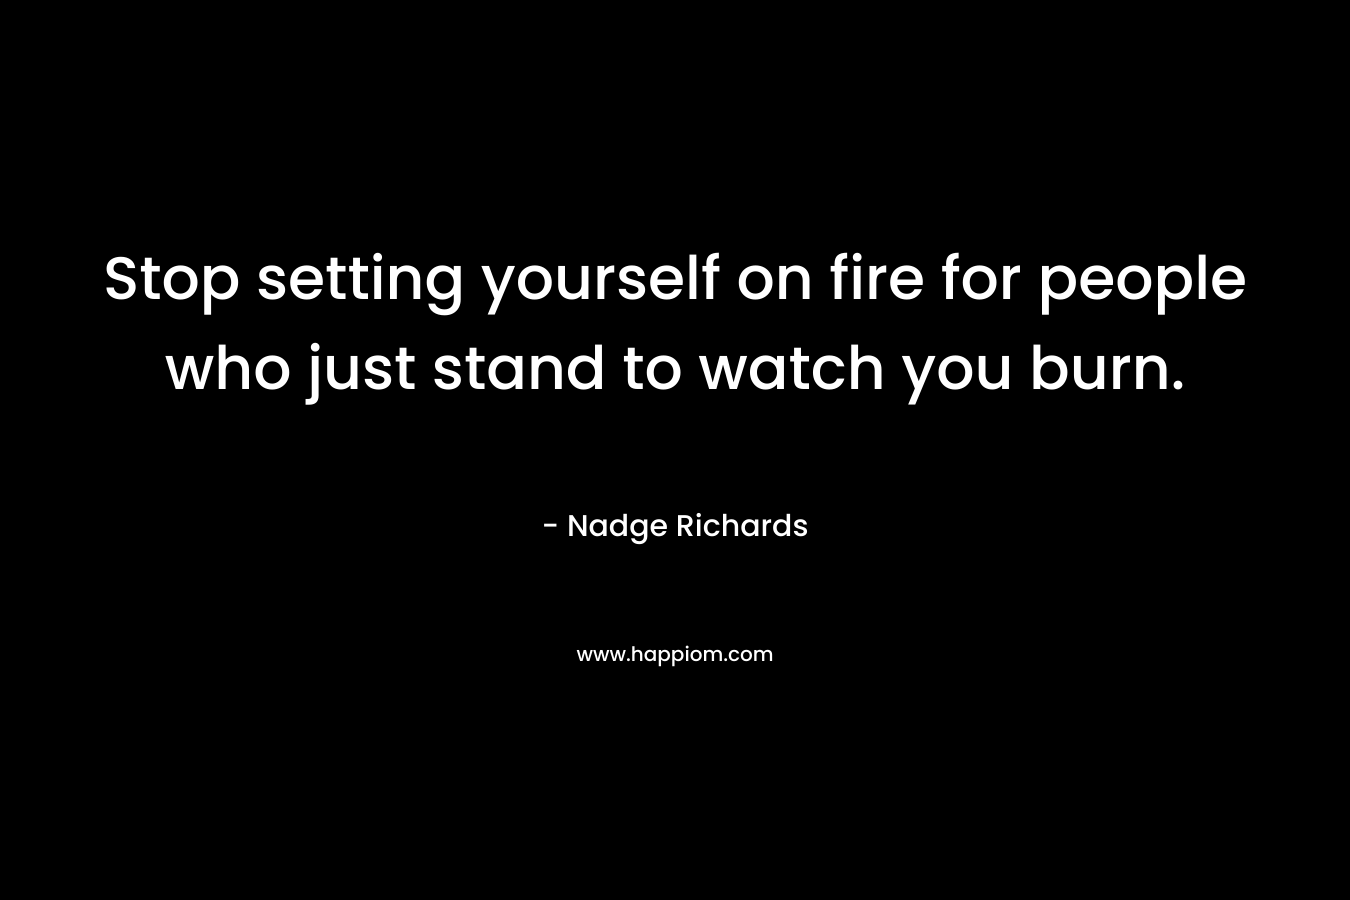 Stop setting yourself on fire for people who just stand to watch you burn.